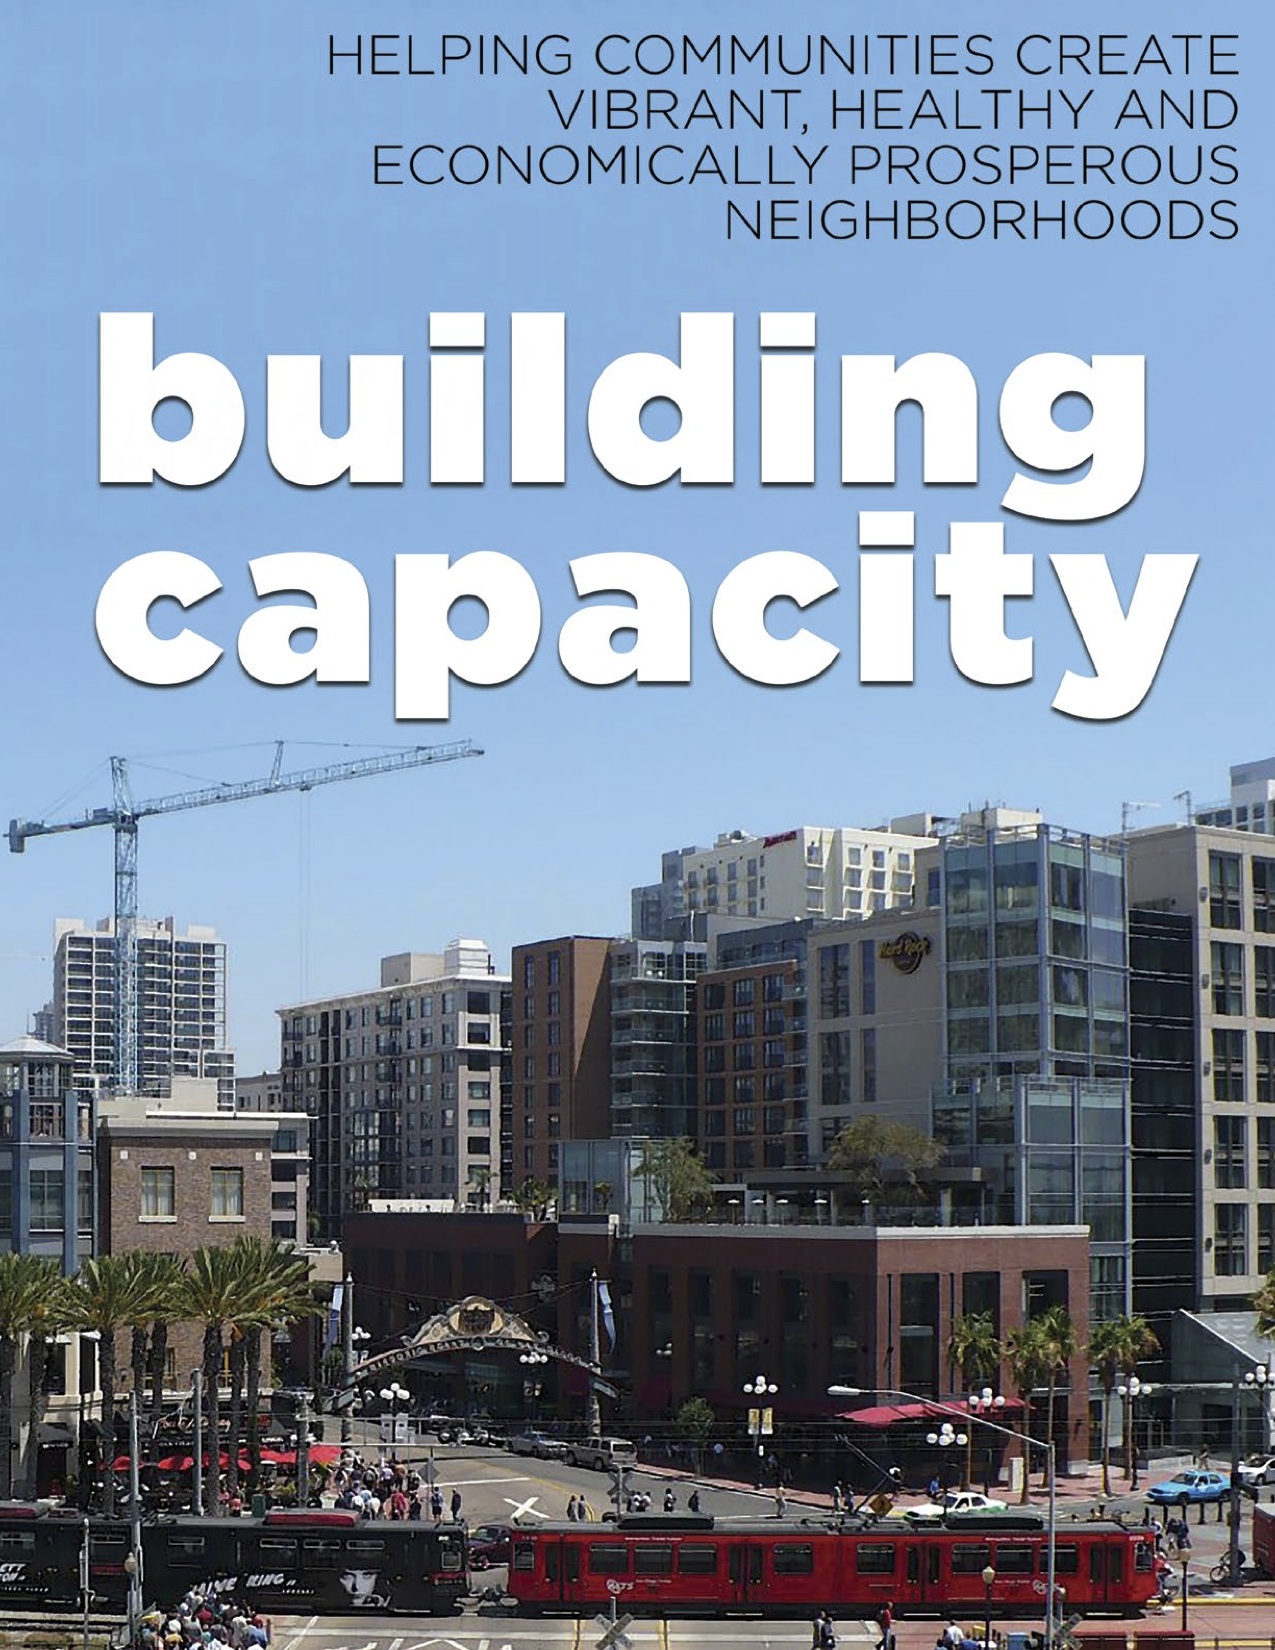 Building Capacity: Helping Communities Create Vibrant, Healthy and Economically Prosperous Neighborhoods